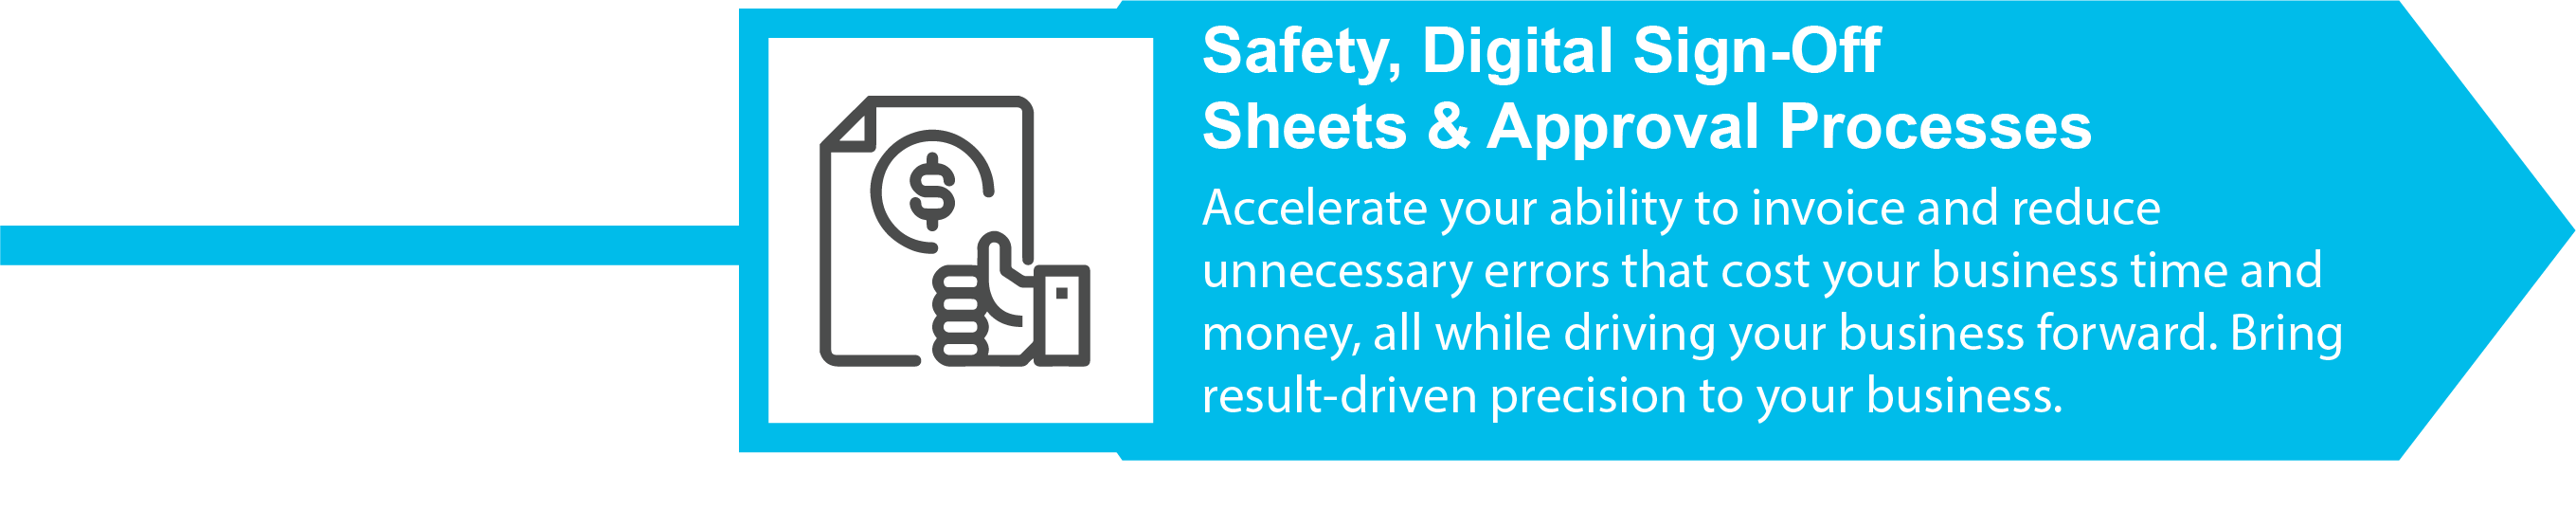 Safety, Digital Sign-Off Sheets & Approval Processes